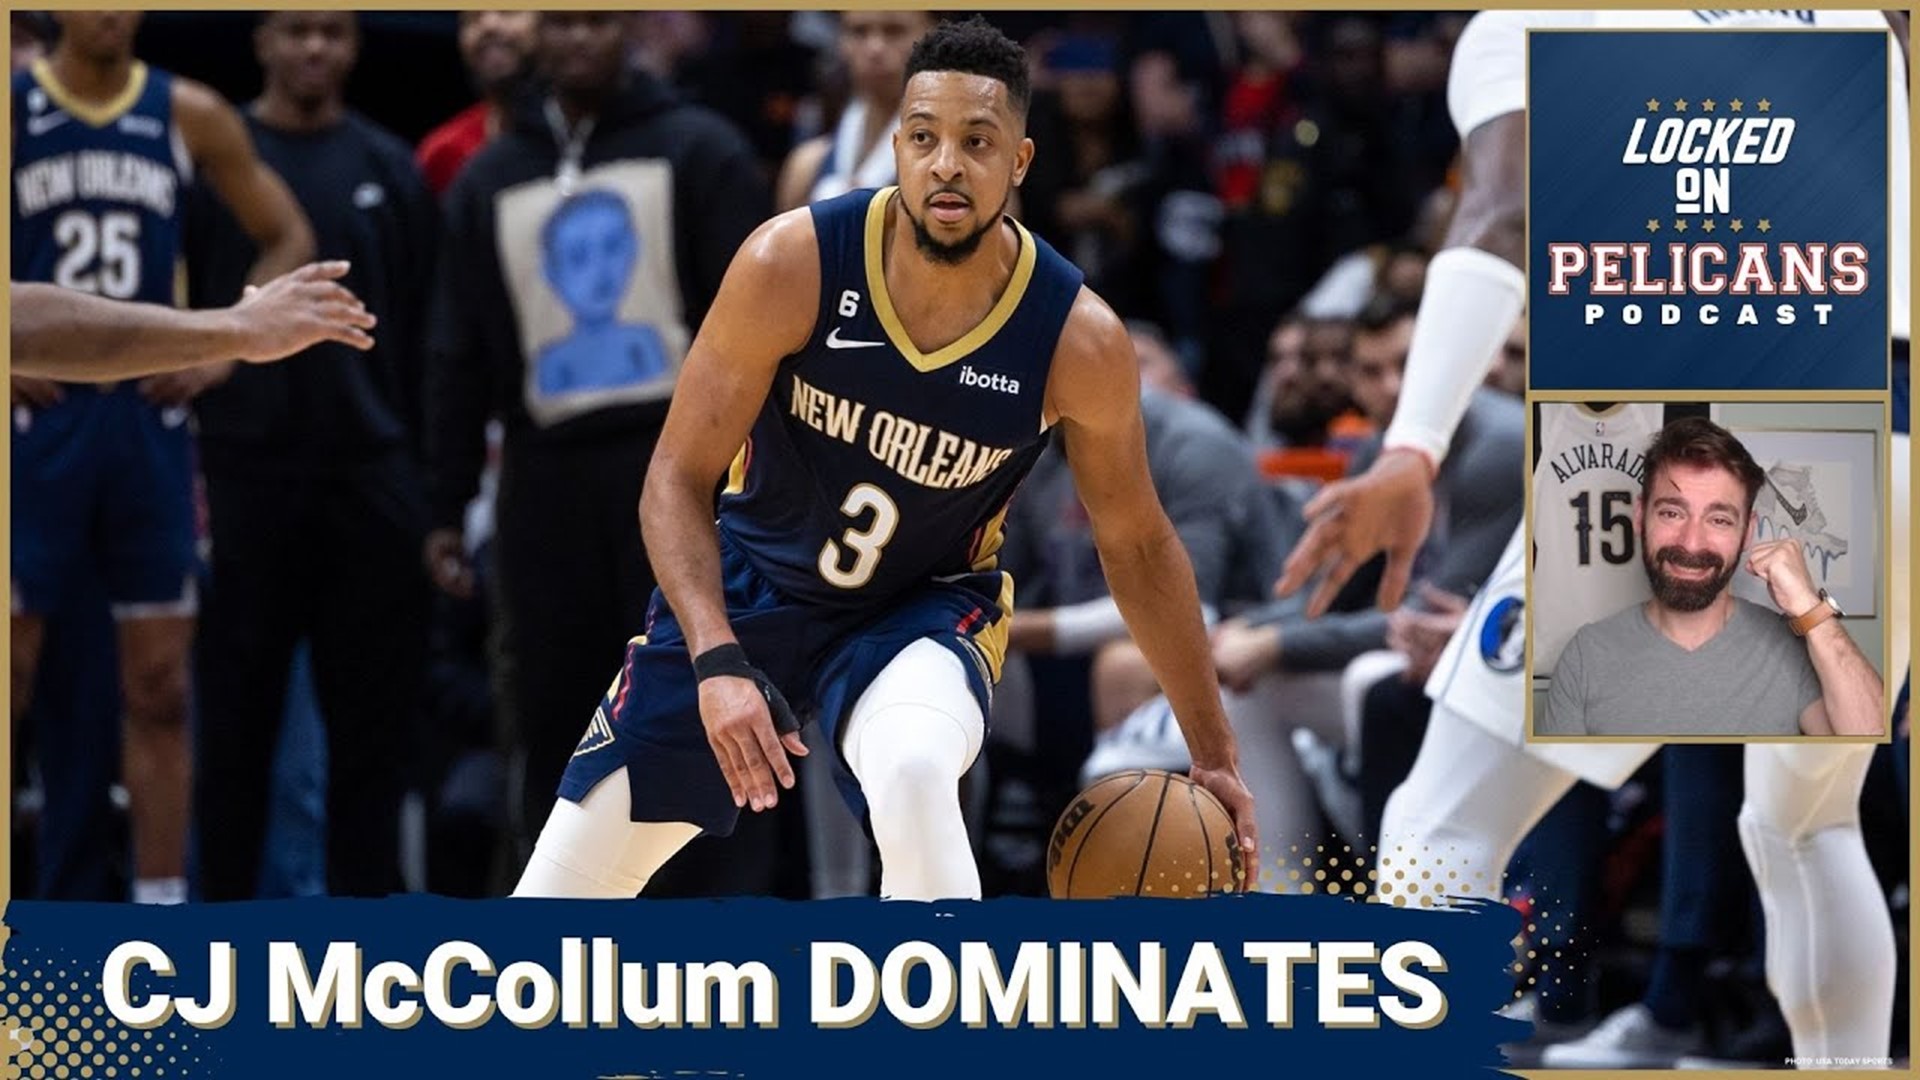 CJ McCollum scored 16 straight points as he took over the 4th quarter of the New Orleans Pelicans win over Luka Doncic and the Dallas Mavericks.